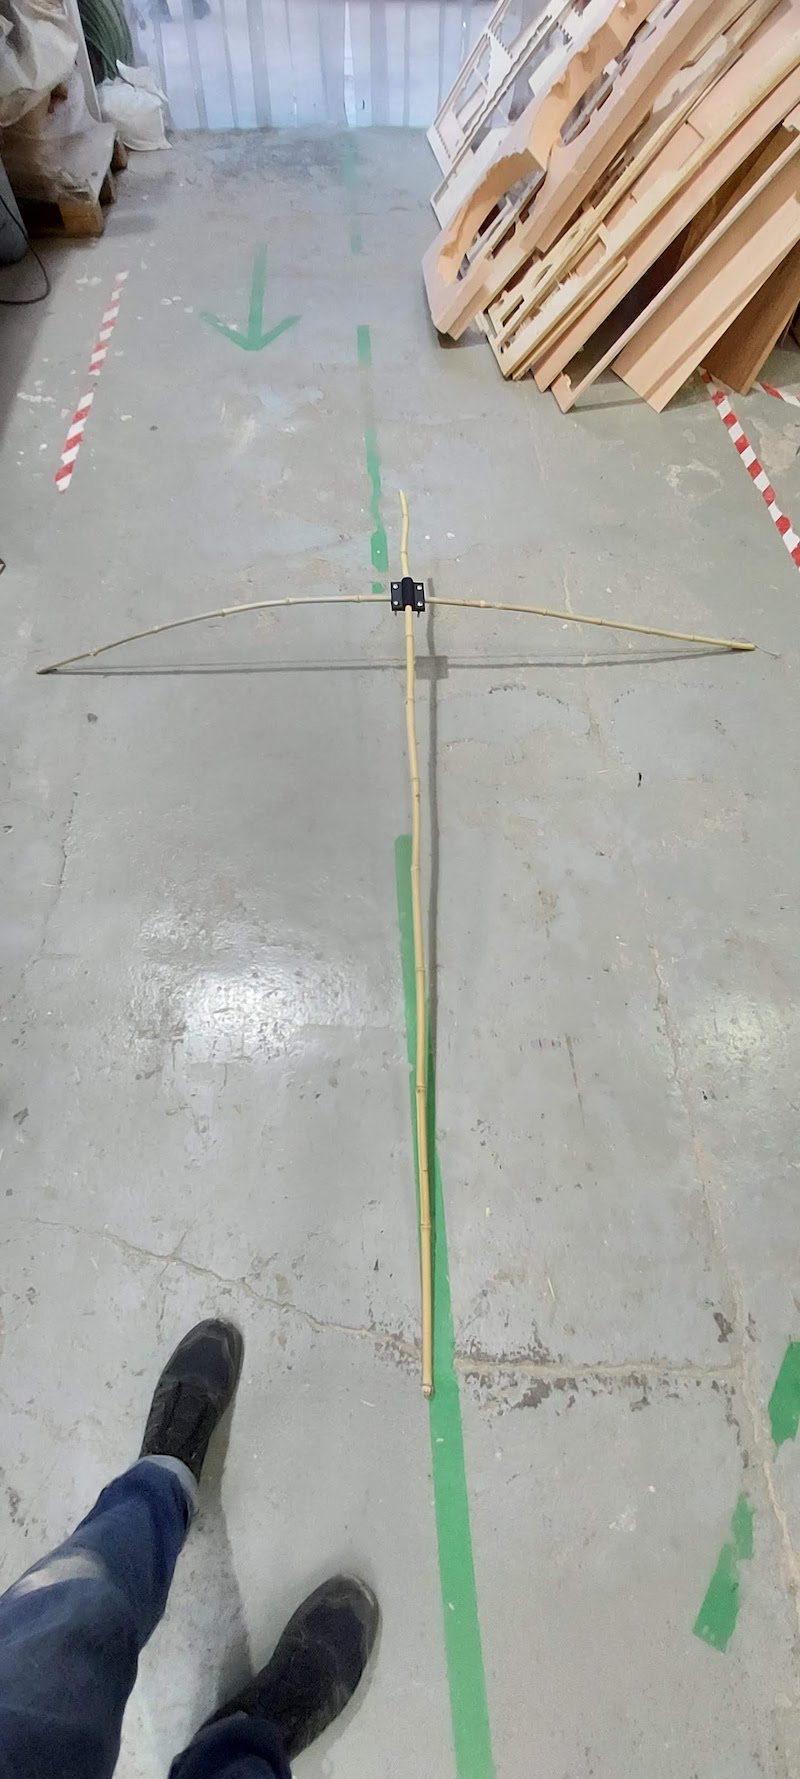 kite on floor with connector